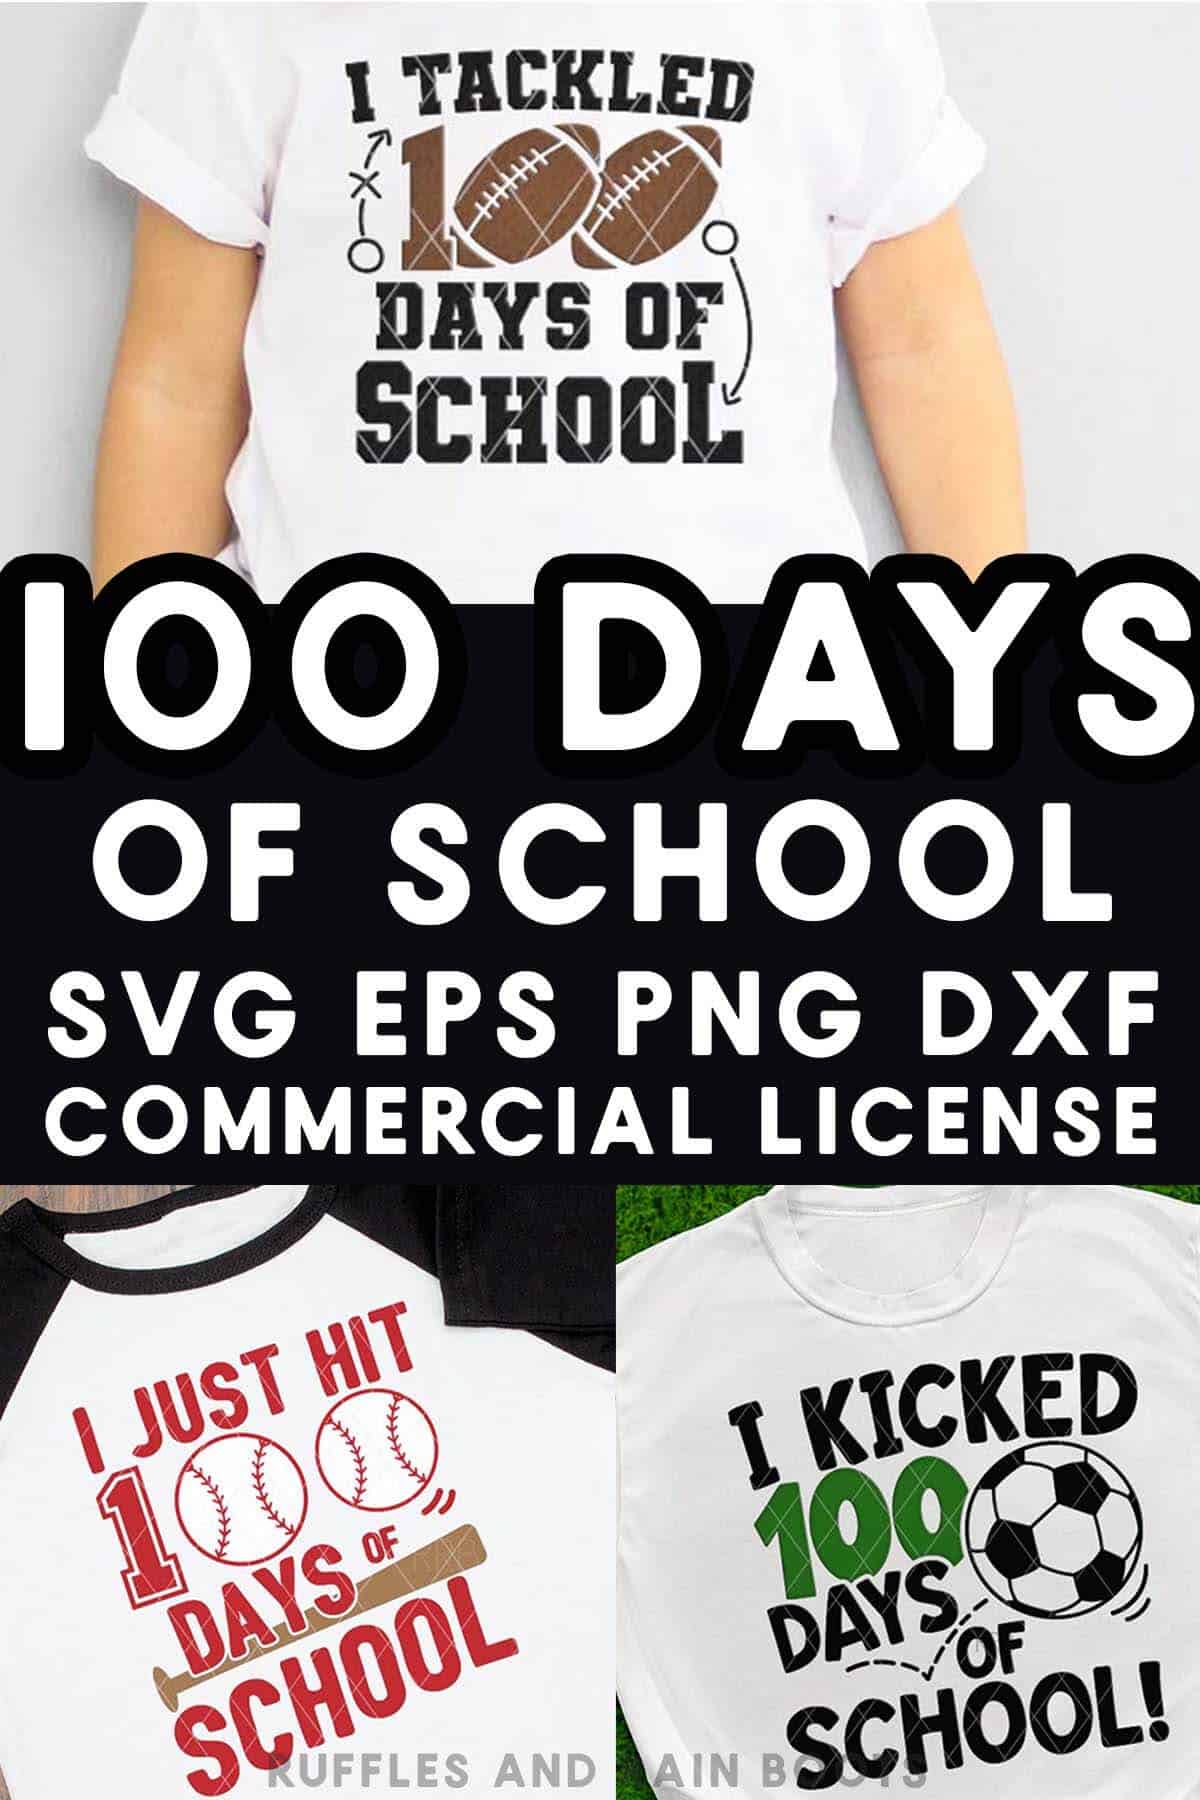 Vertical split image collage of three 100 days of school sports SVG designs with a commercial license.